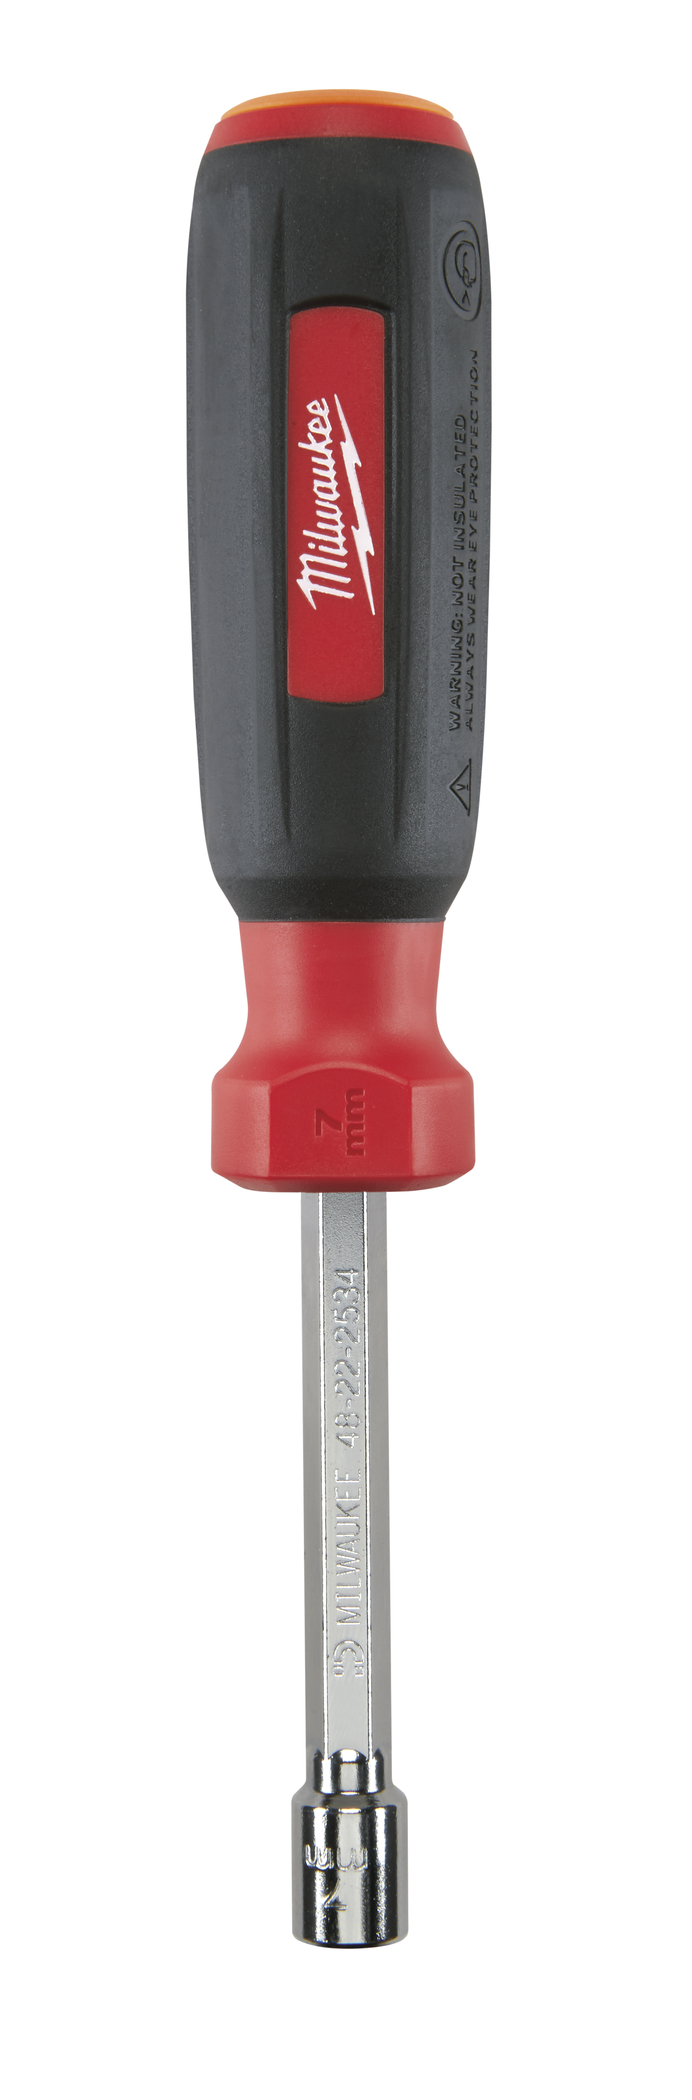 7mm HollowCore Magnetic Nut Driver